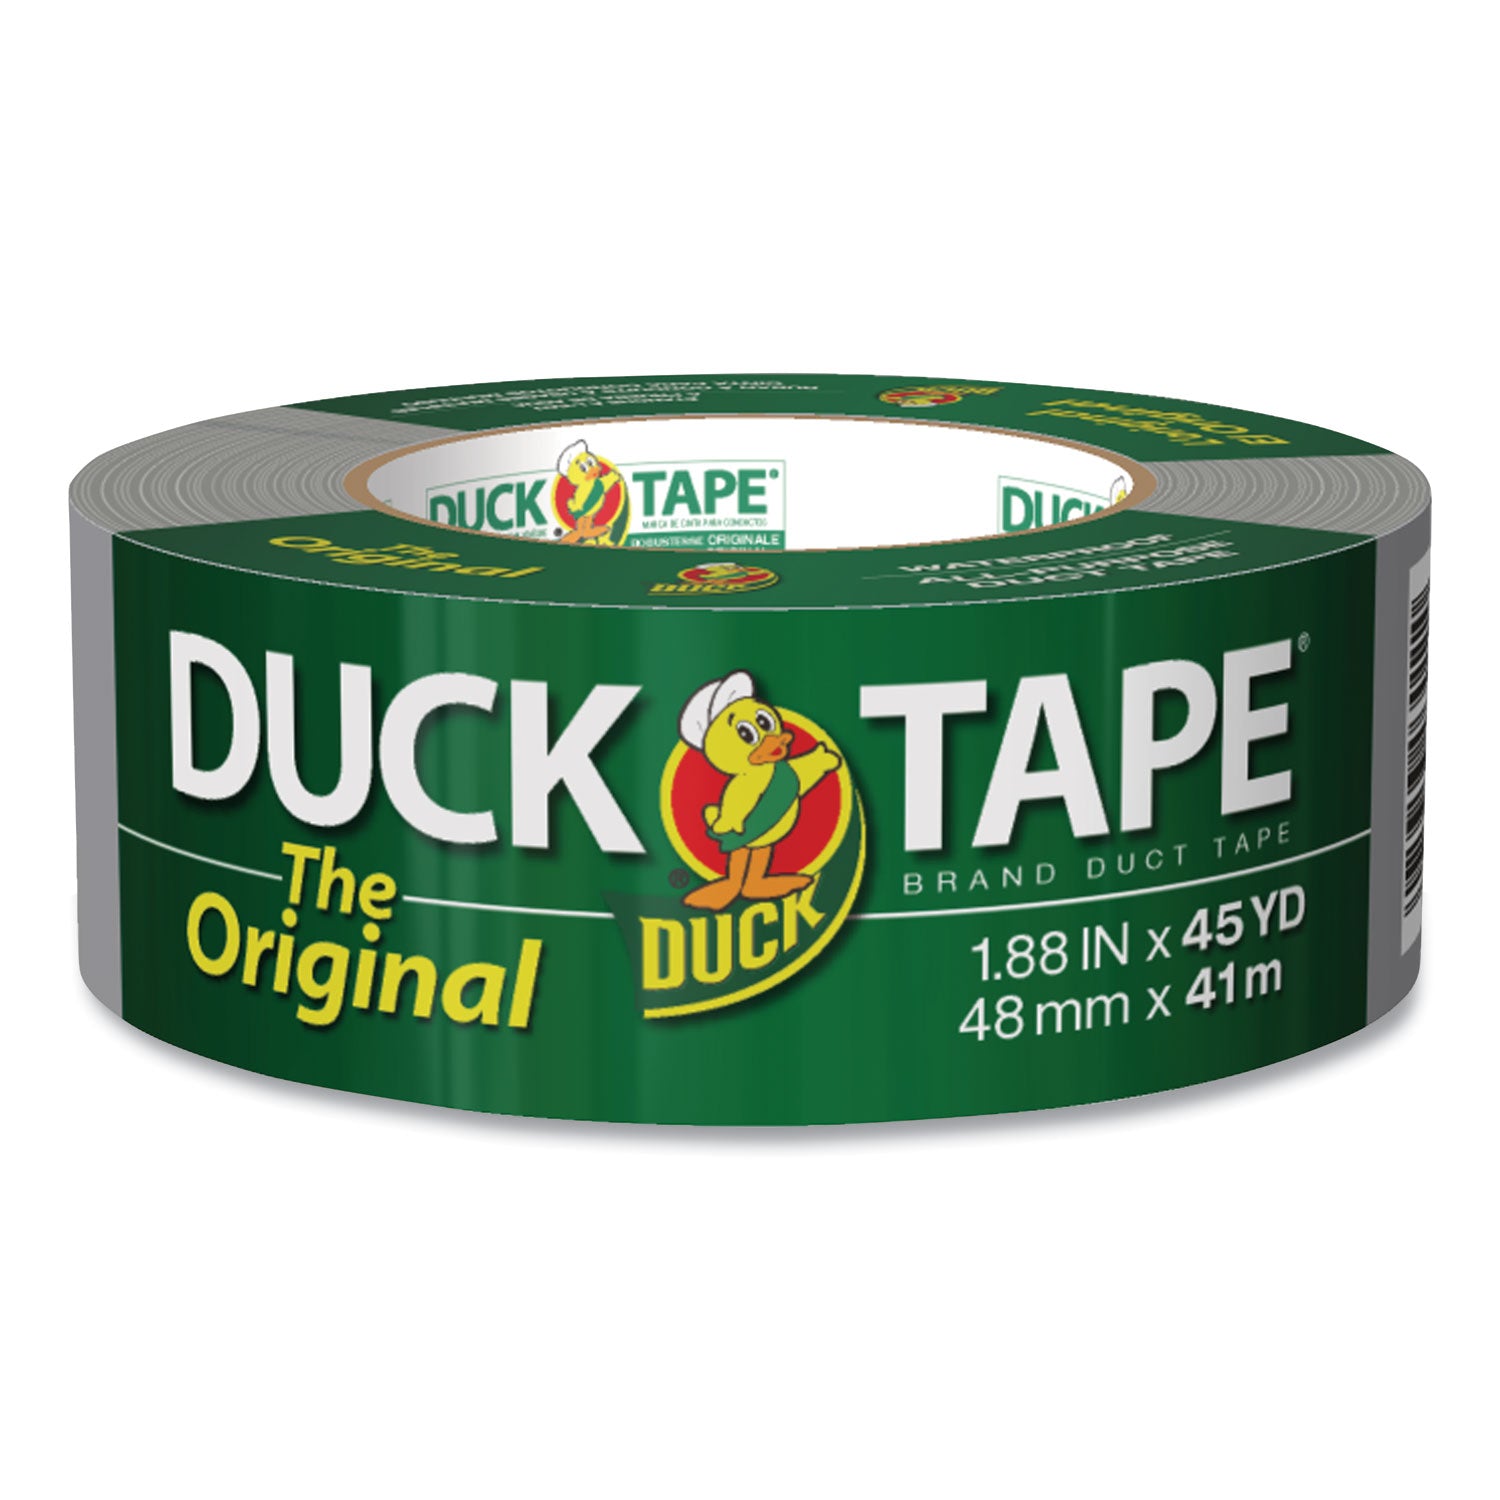 Duct Tape, 3" Core, 1.88" x 45 yds, Gray - 